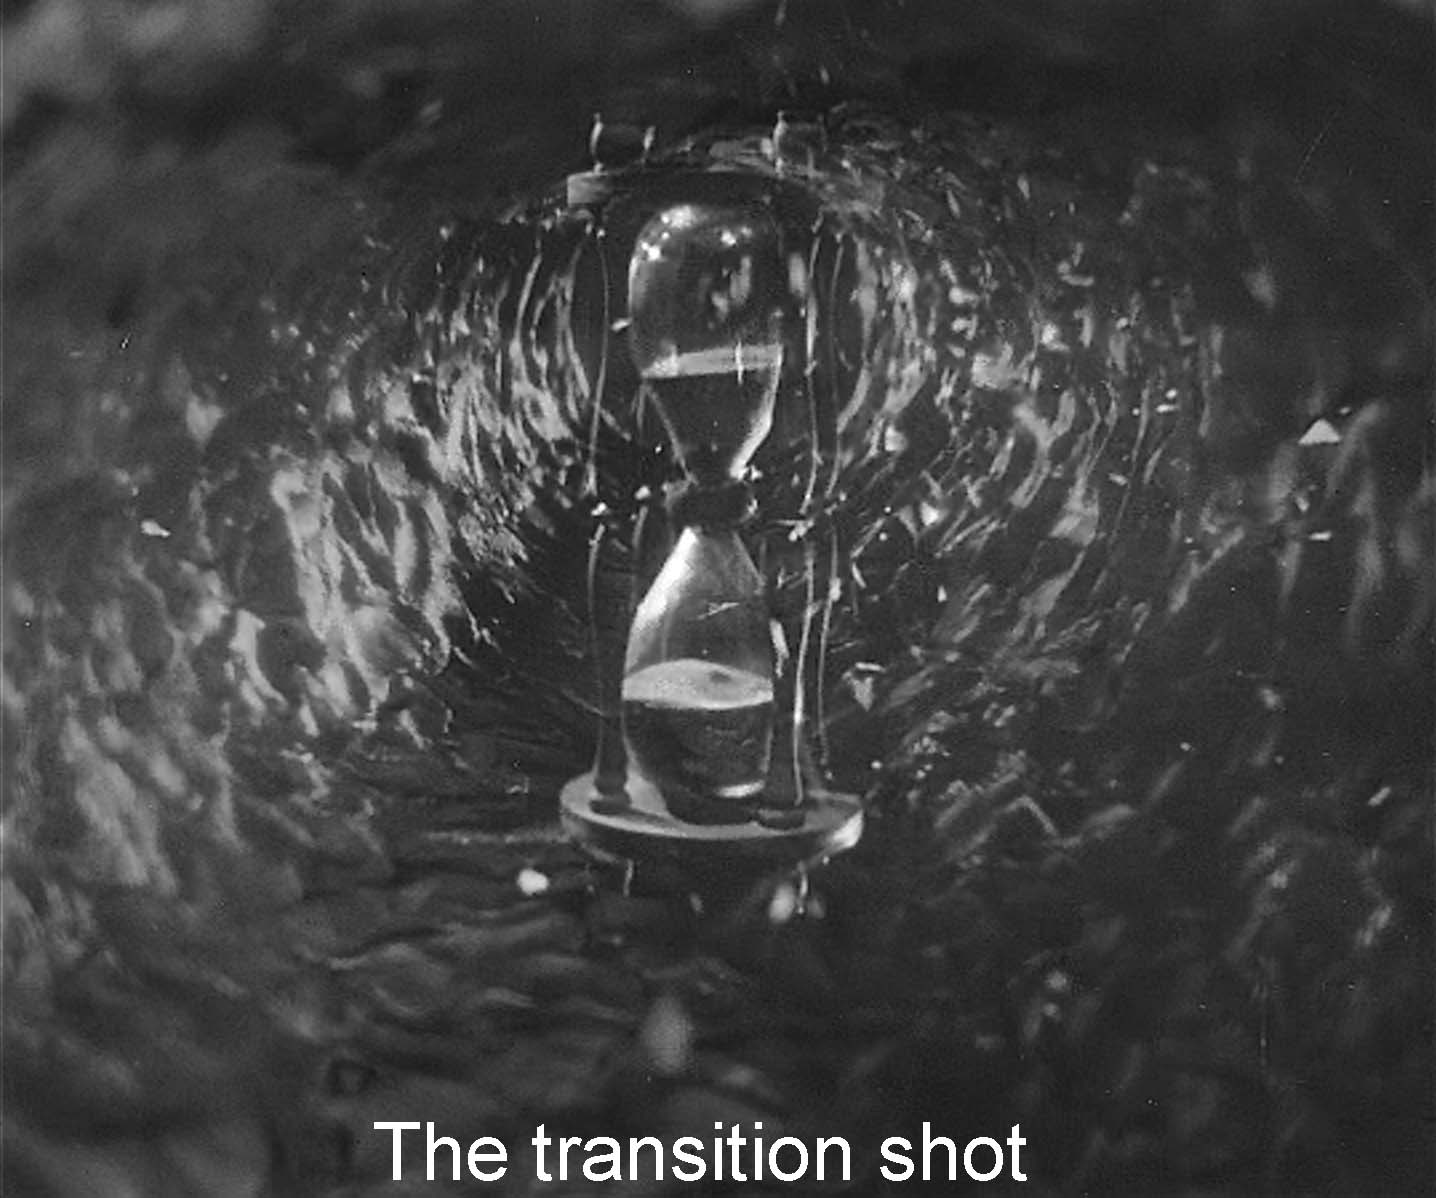 The transition shot